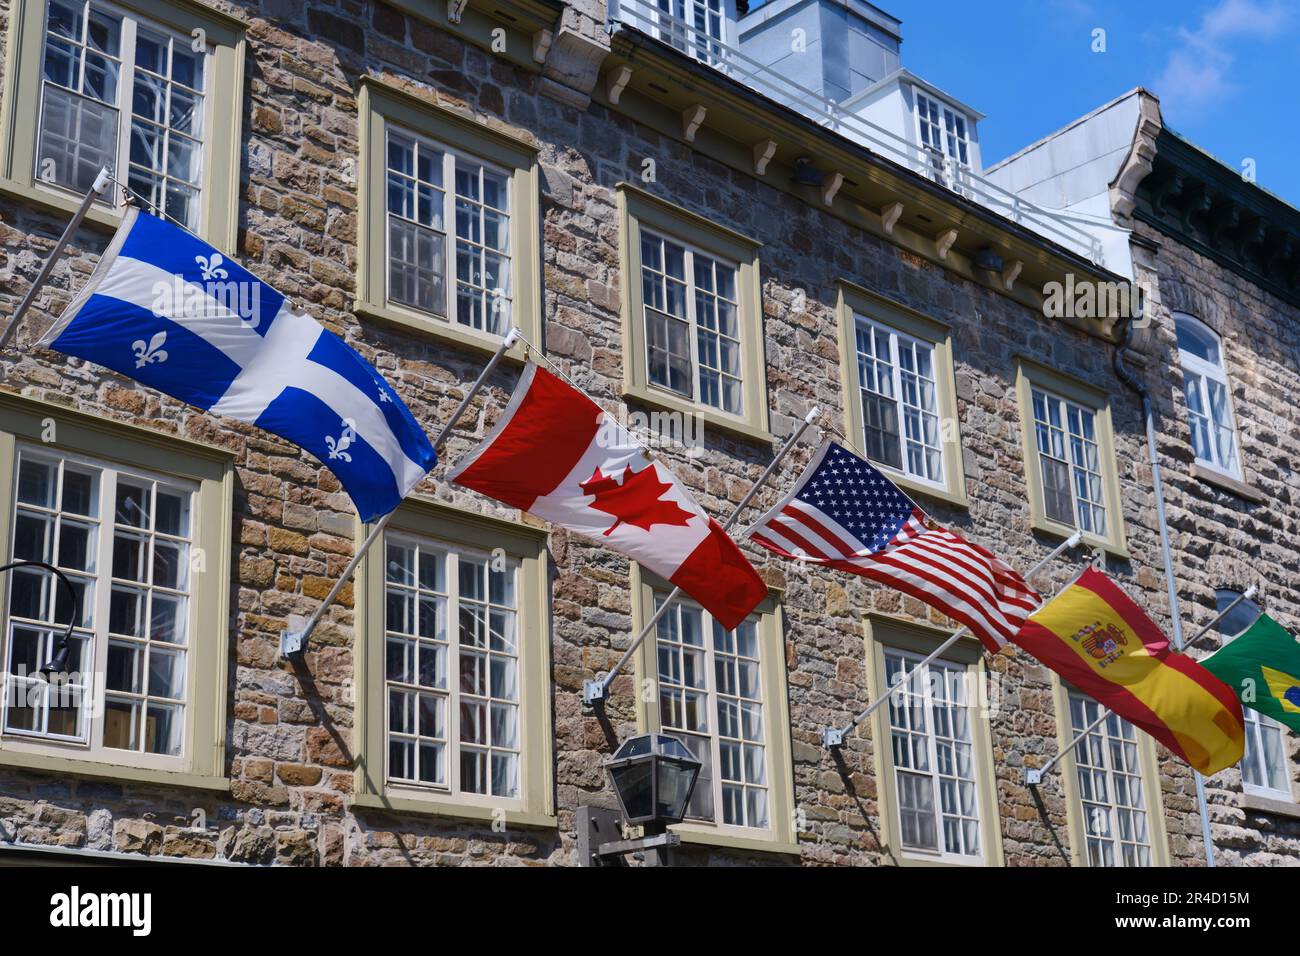 Flags of Quebec, Canada, USA and Spain outside a building in the old town, Quebec City, Canada Stock Photo